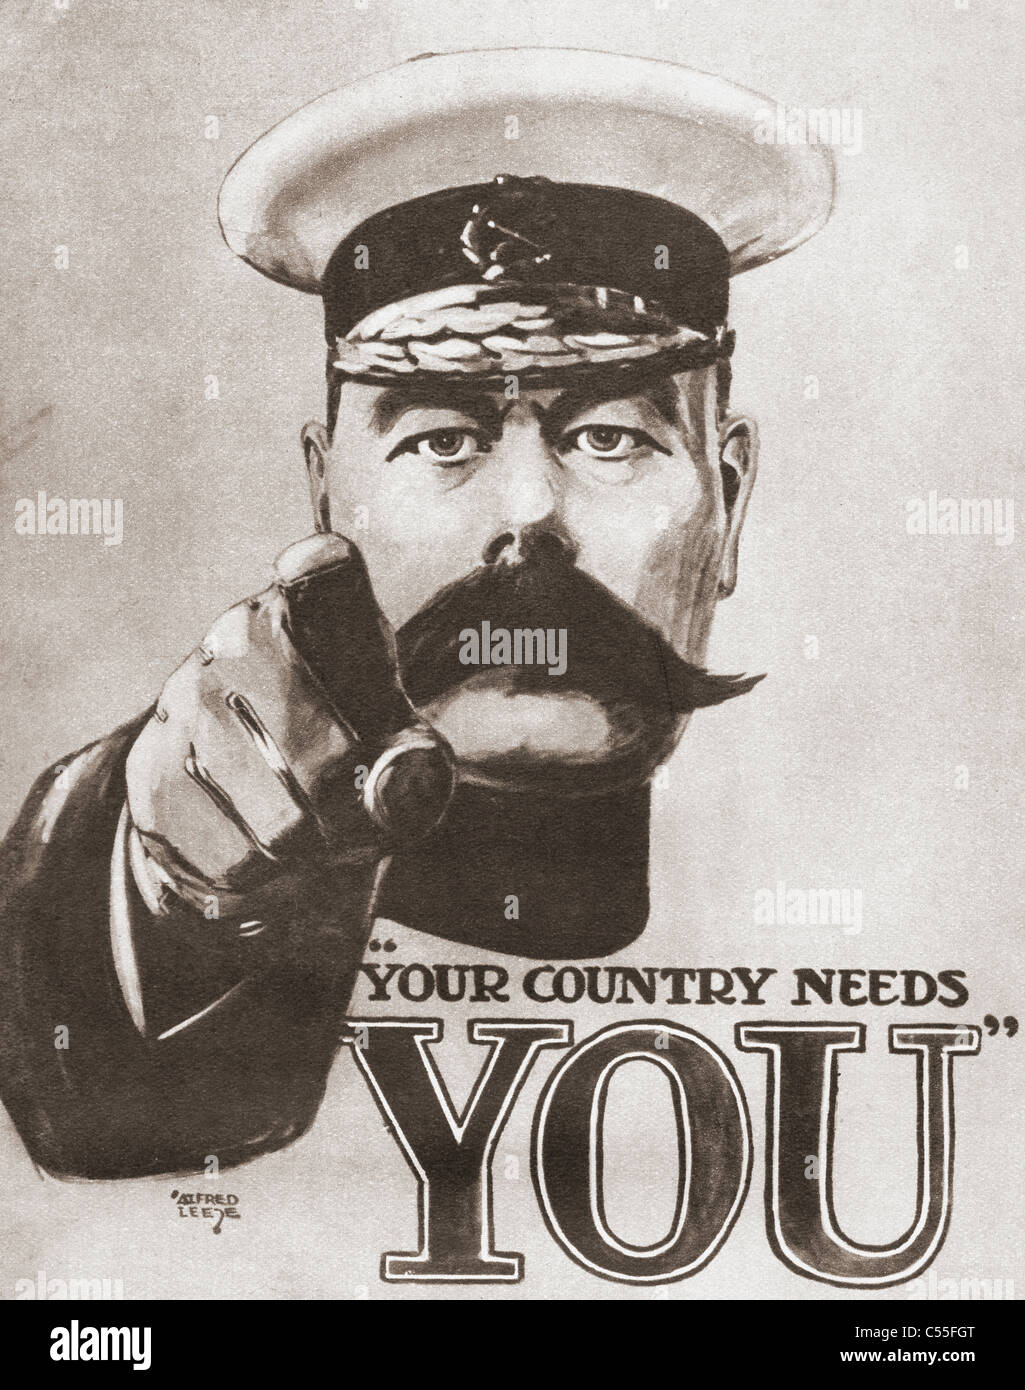 The 1914 British Wartime Recruitment Poster Depicting Lord